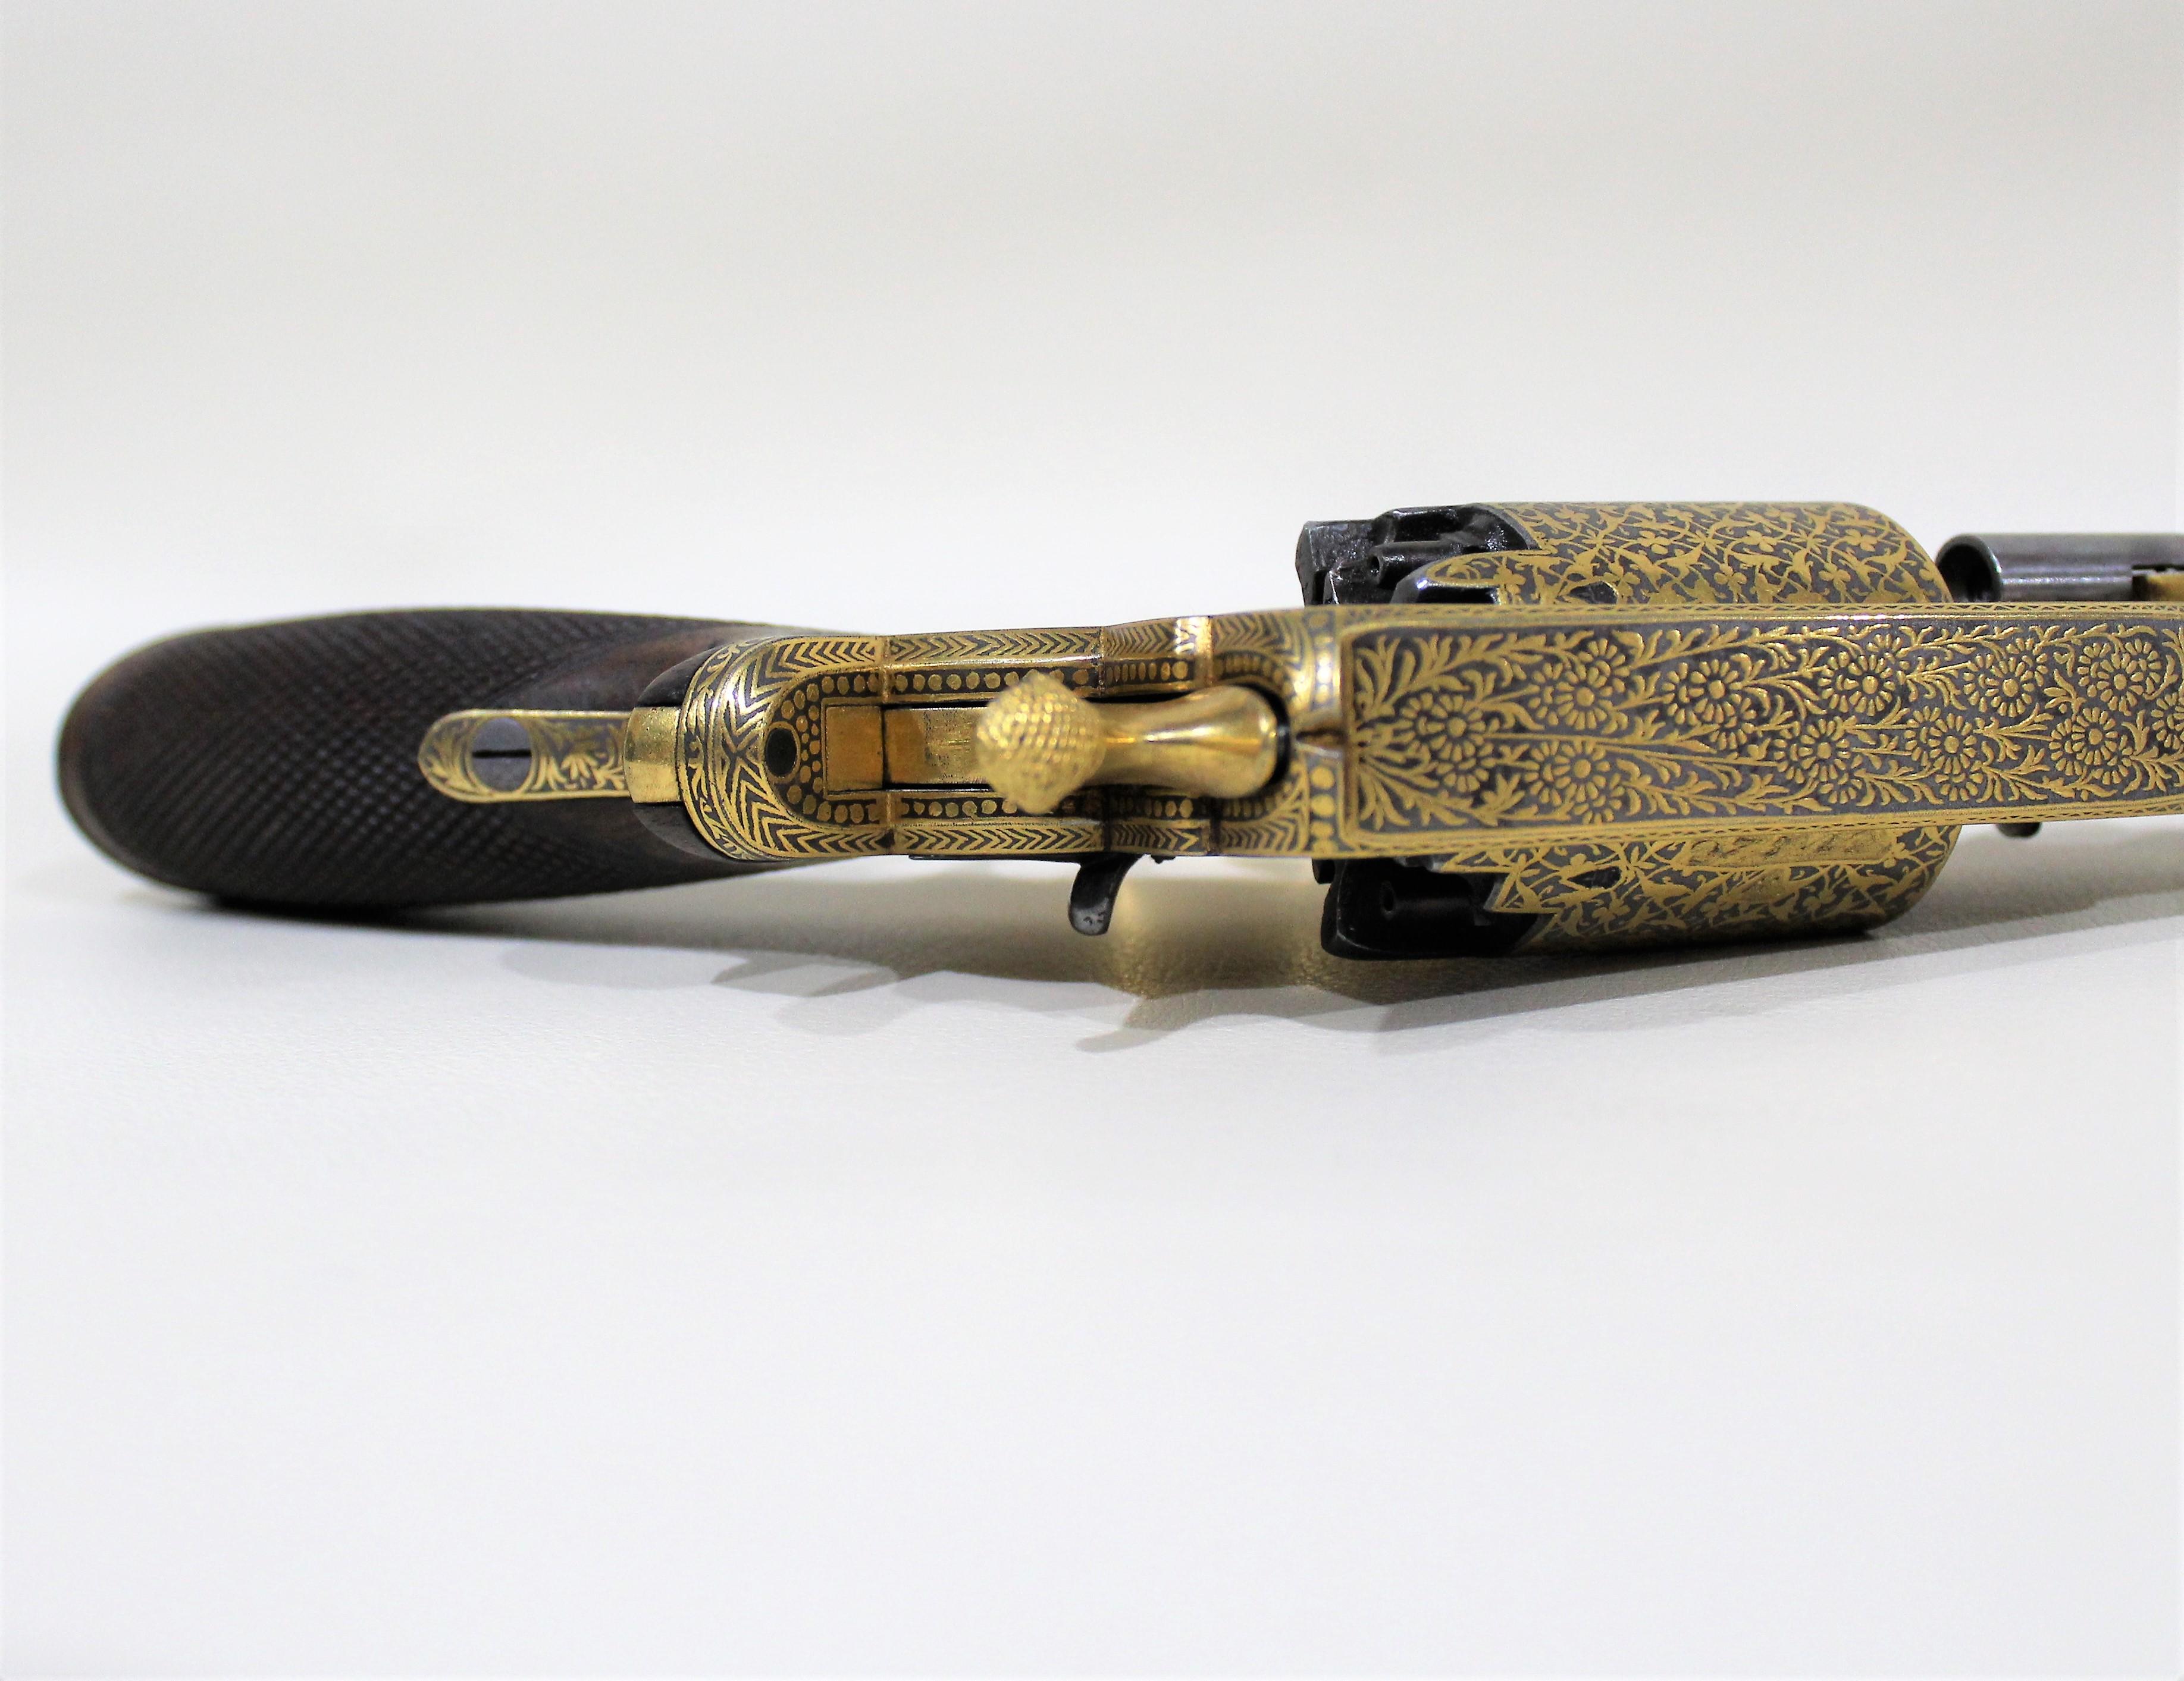 Metal Beaumont-Adams Revolver with Gold Damascene Embellishment and Original Case